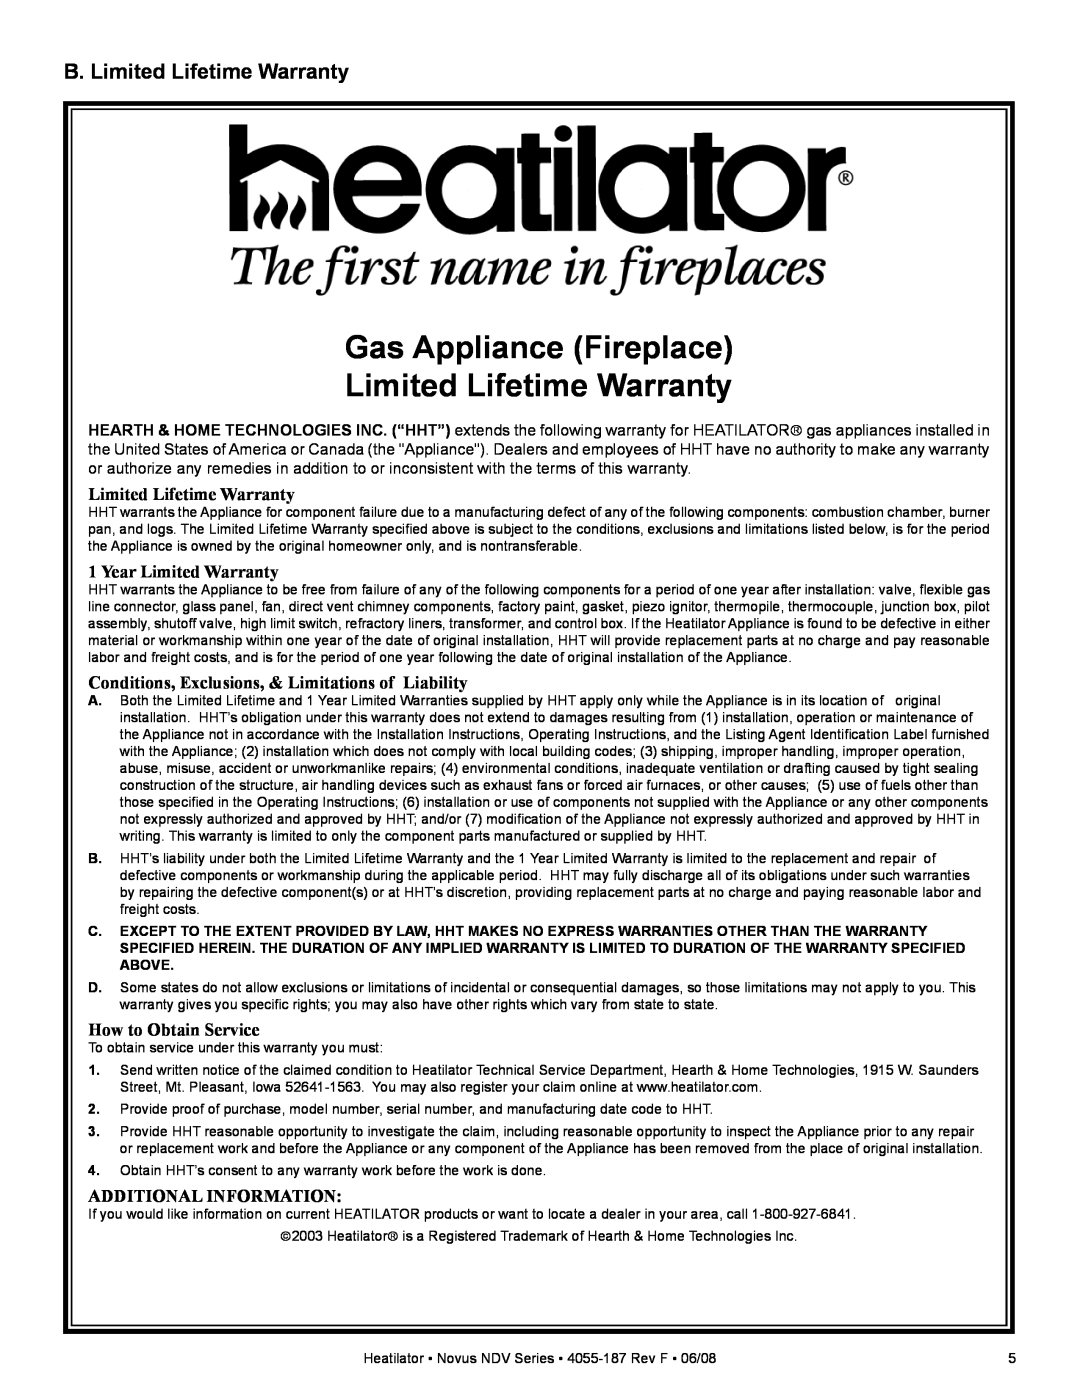 Hearth and Home Technologies NDV3933 B. Limited Lifetime Warranty, Gas Appliance Fireplace Limited Lifetime Warranty 